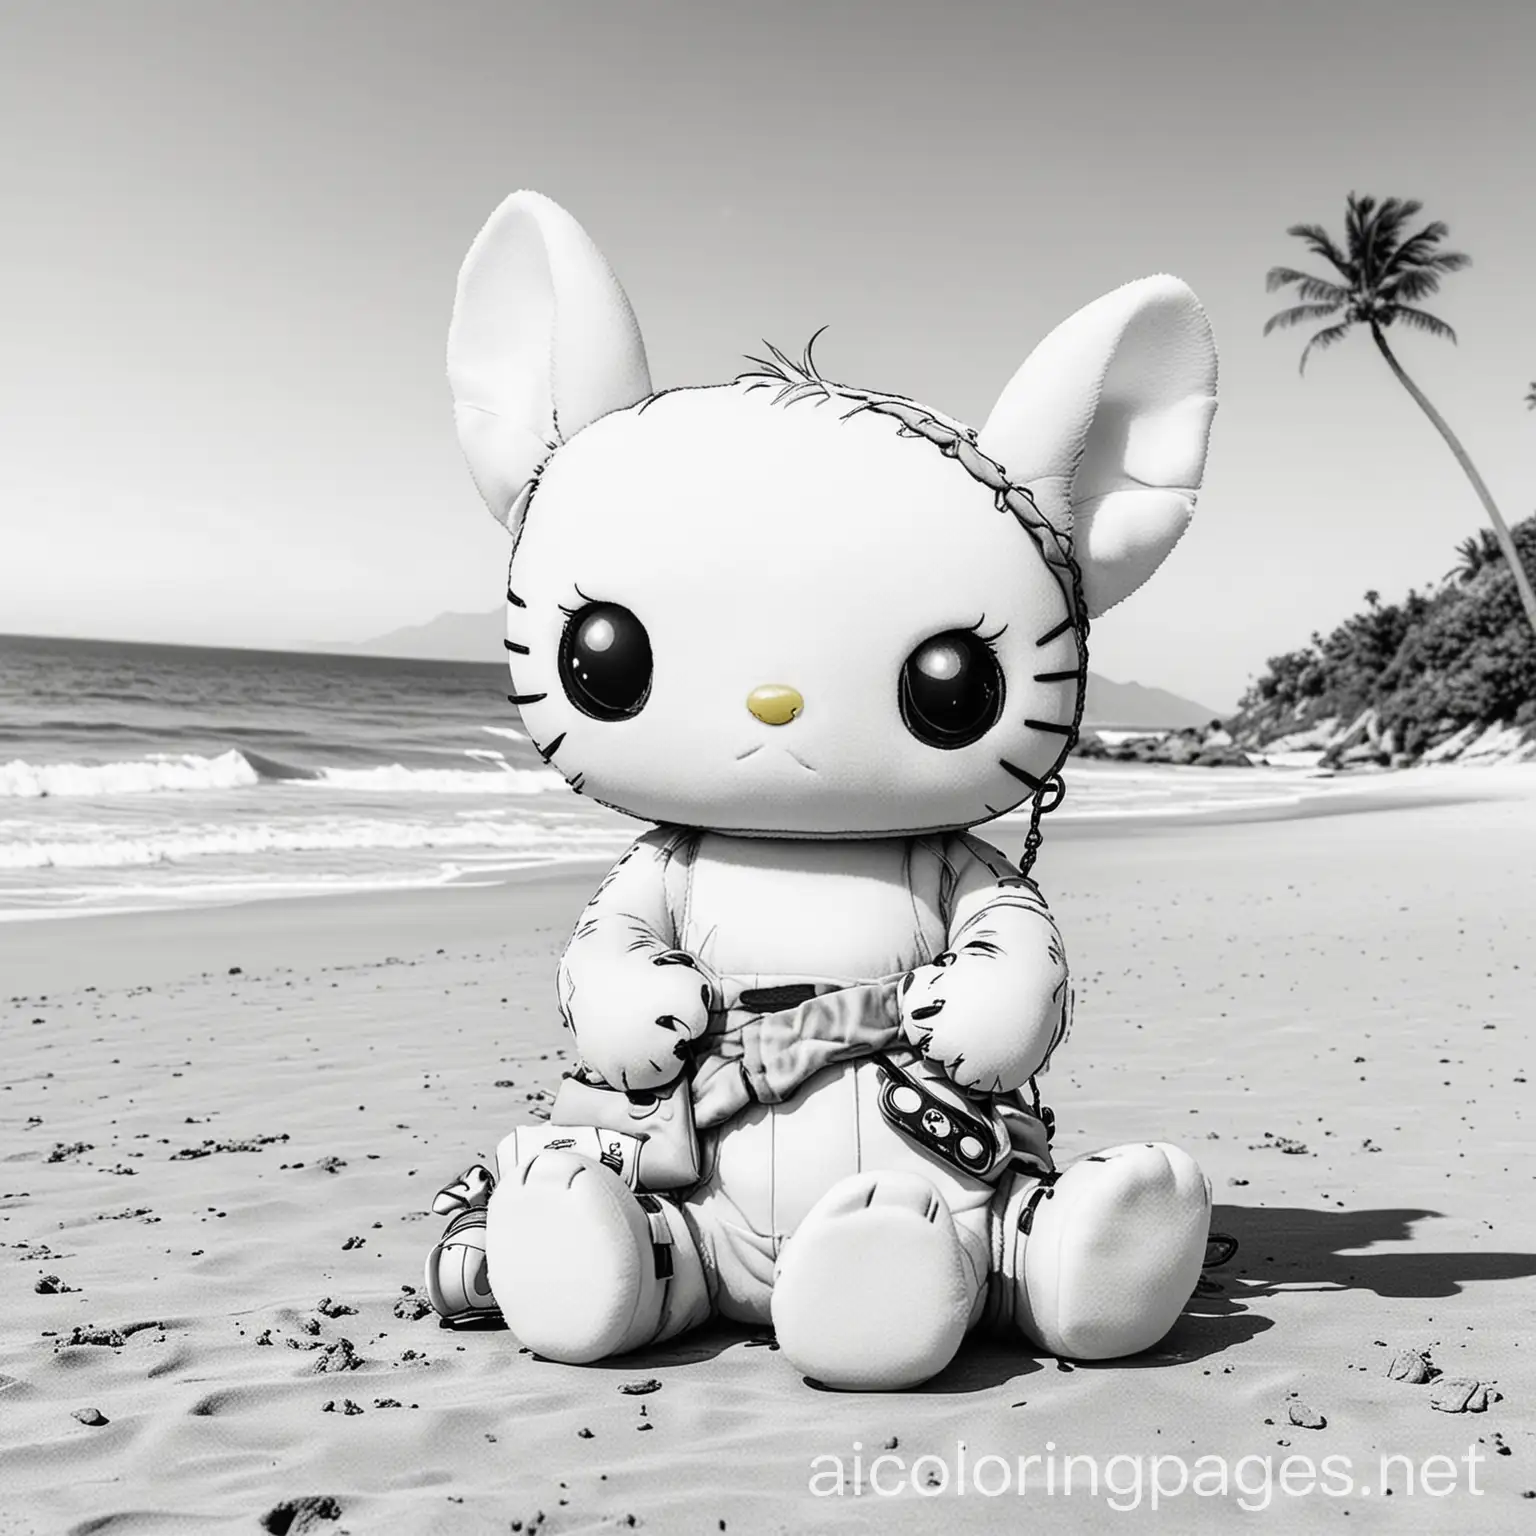 Hello Kitty hanging out with Stitch at the beach , Coloring Page, black and white, line art, white background, Simplicity, Ample White Space. The background of the coloring page is plain white to make it easy for young children to color within the lines. The outlines of all the subjects are easy to distinguish, making it simple for kids to color without too much difficulty